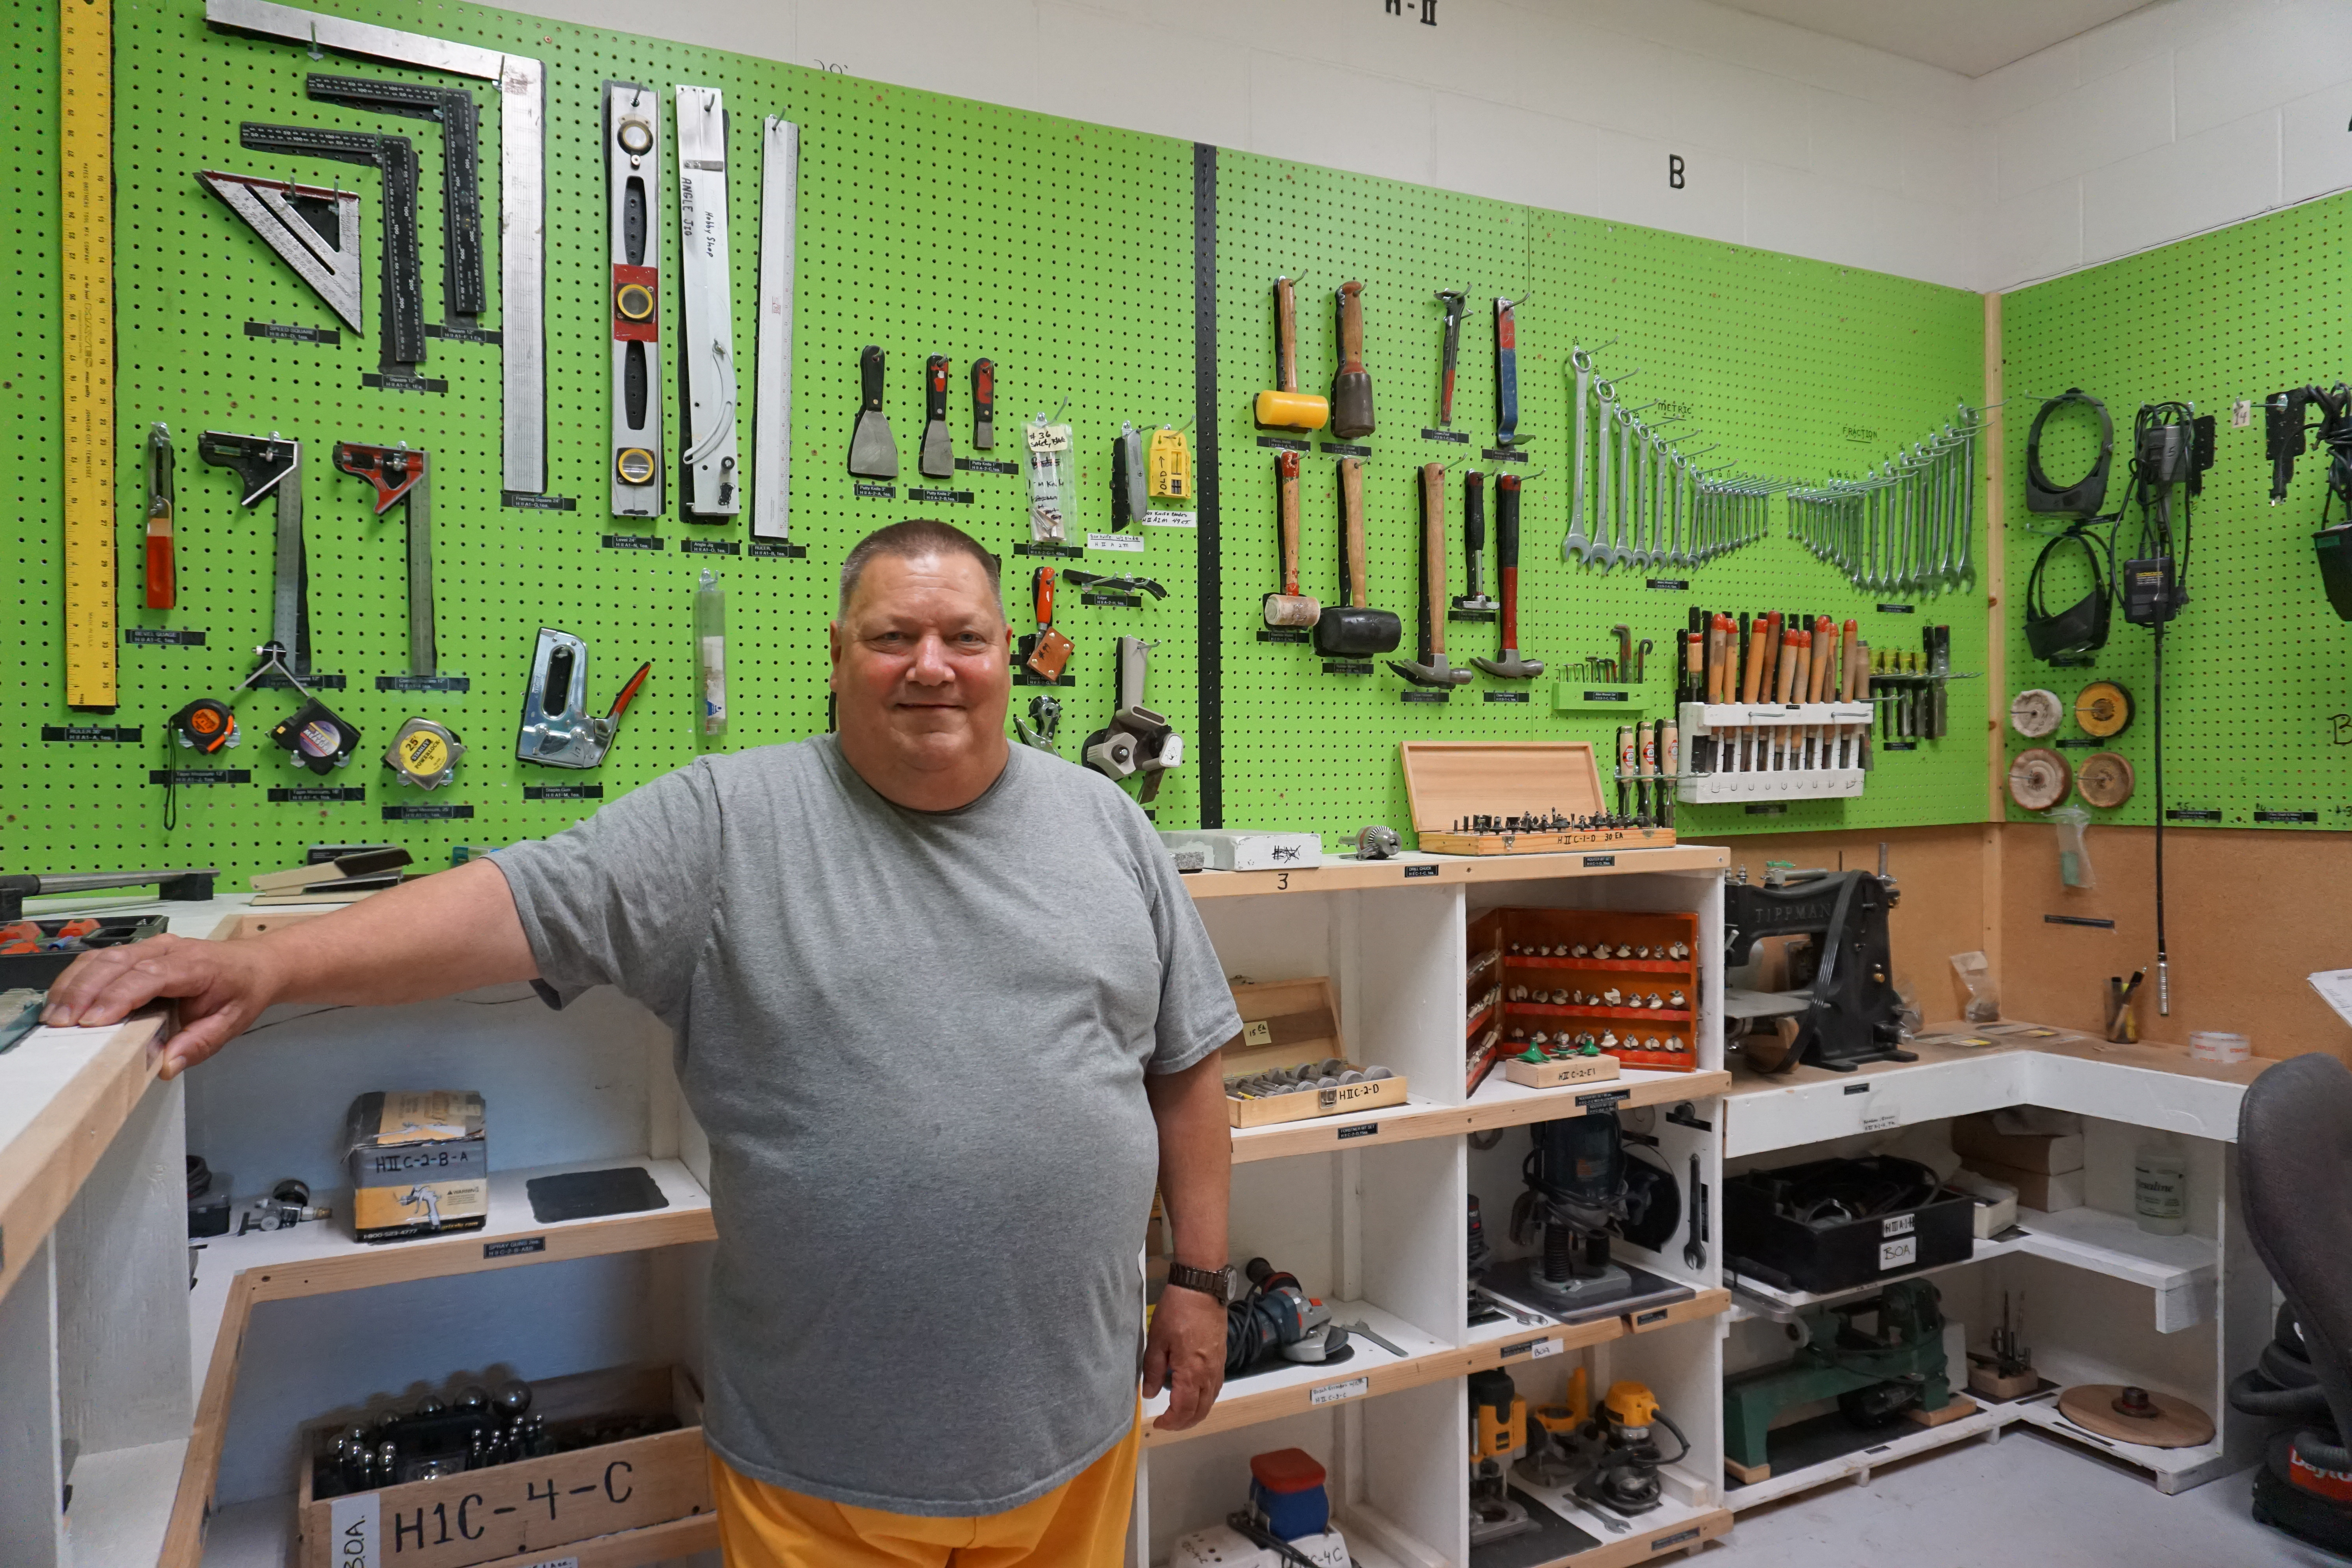 Mike Lawson heads the prison club that provides tools for the hobby shop at Spring Creek Correctional Center. (Photo by Anne Hillman/Alaska Public Media)